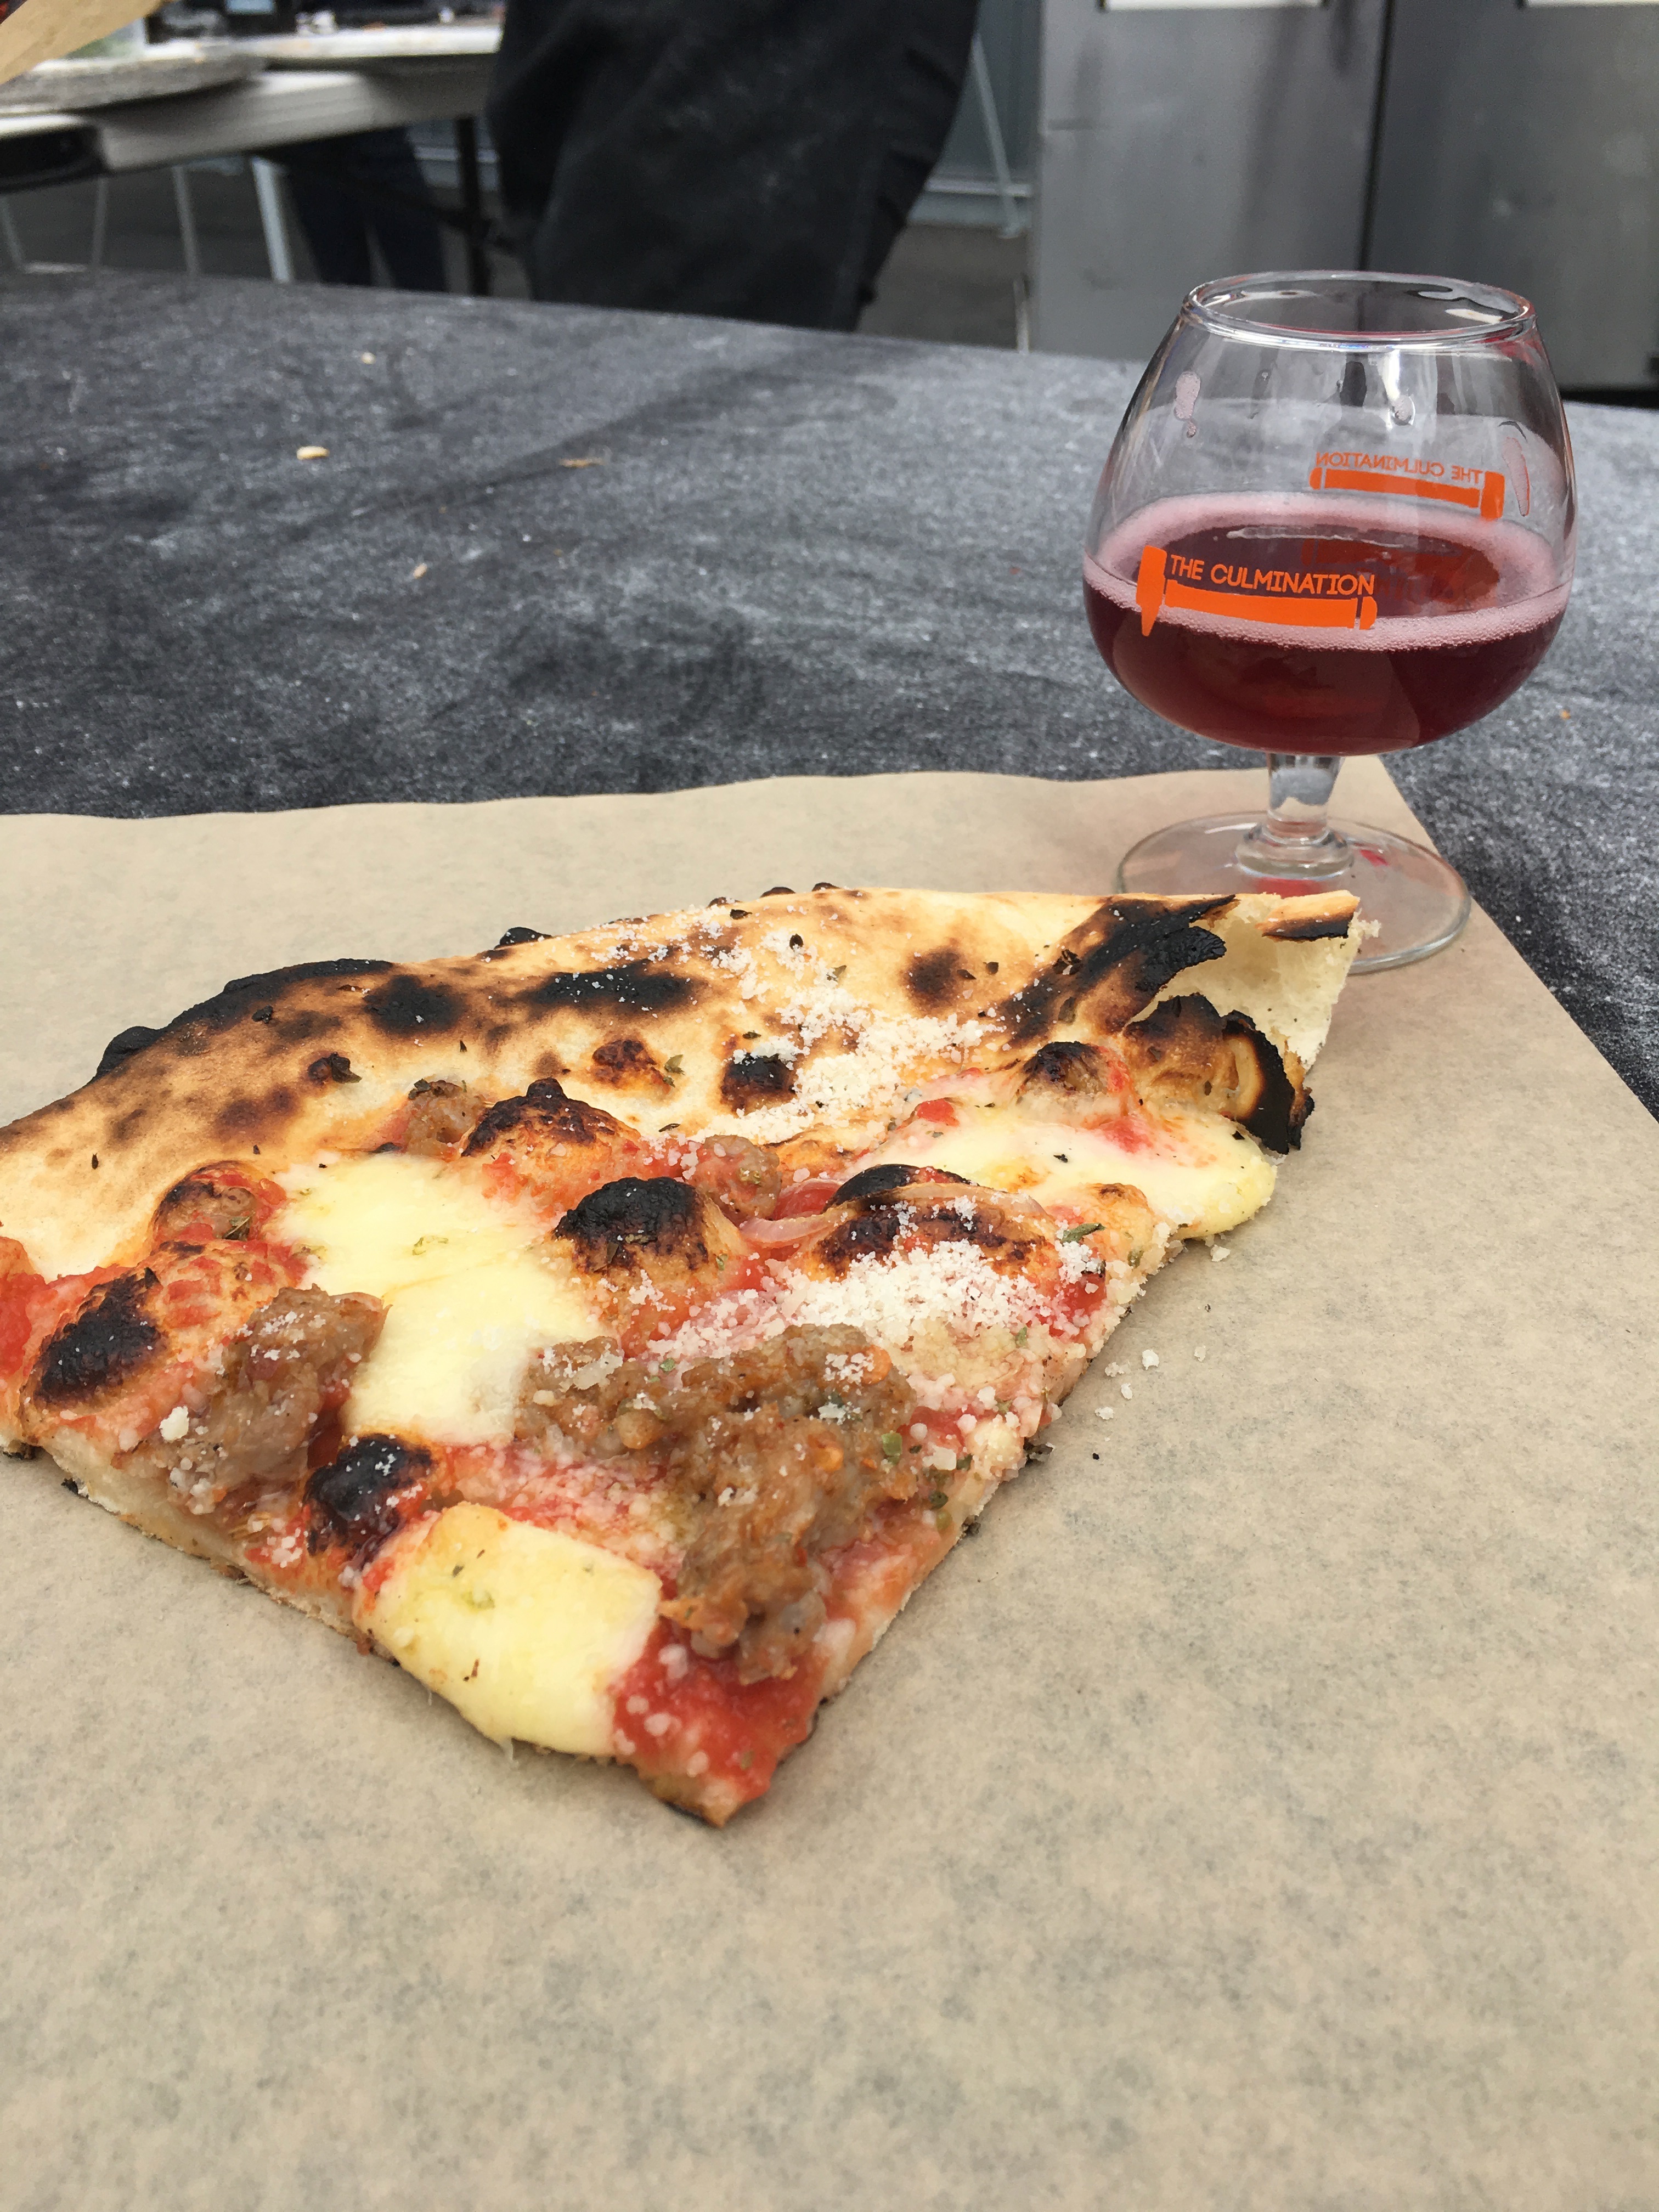 The Masonry from Seattle made pizza for the attendees at The Culmination Festival at Anchorage Brewing.